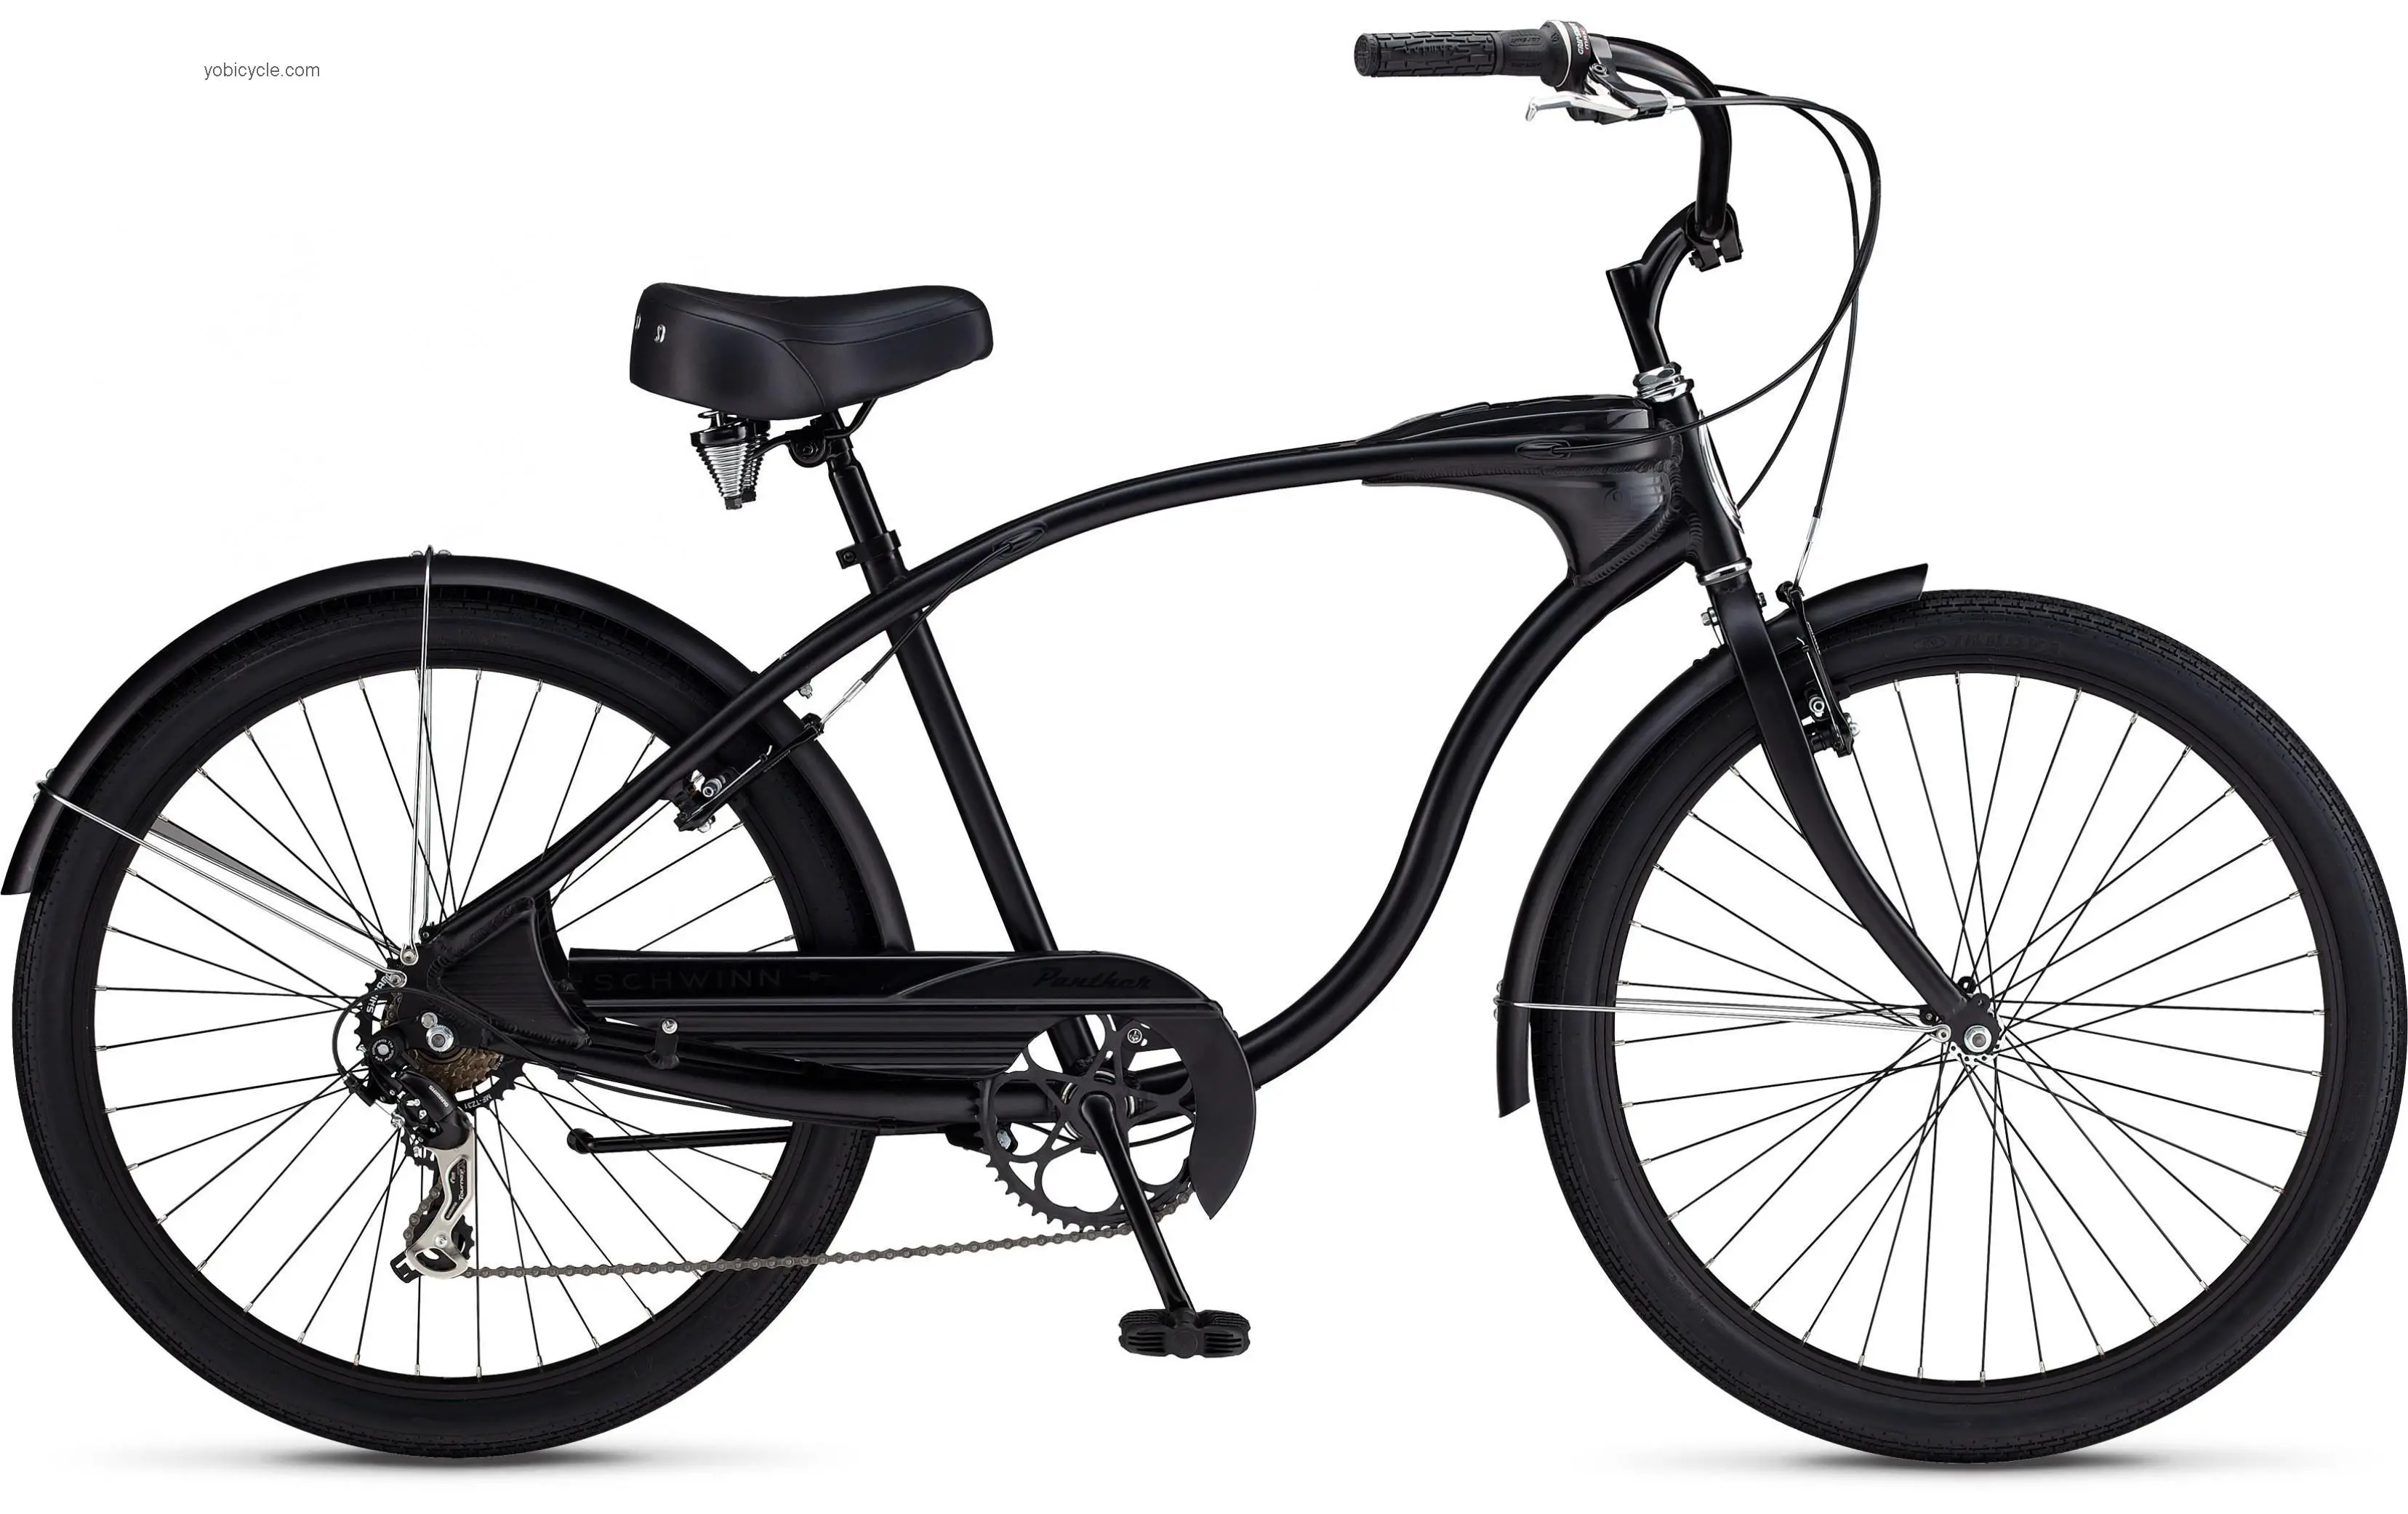 Schwinn Panther 2012 comparison online with competitors